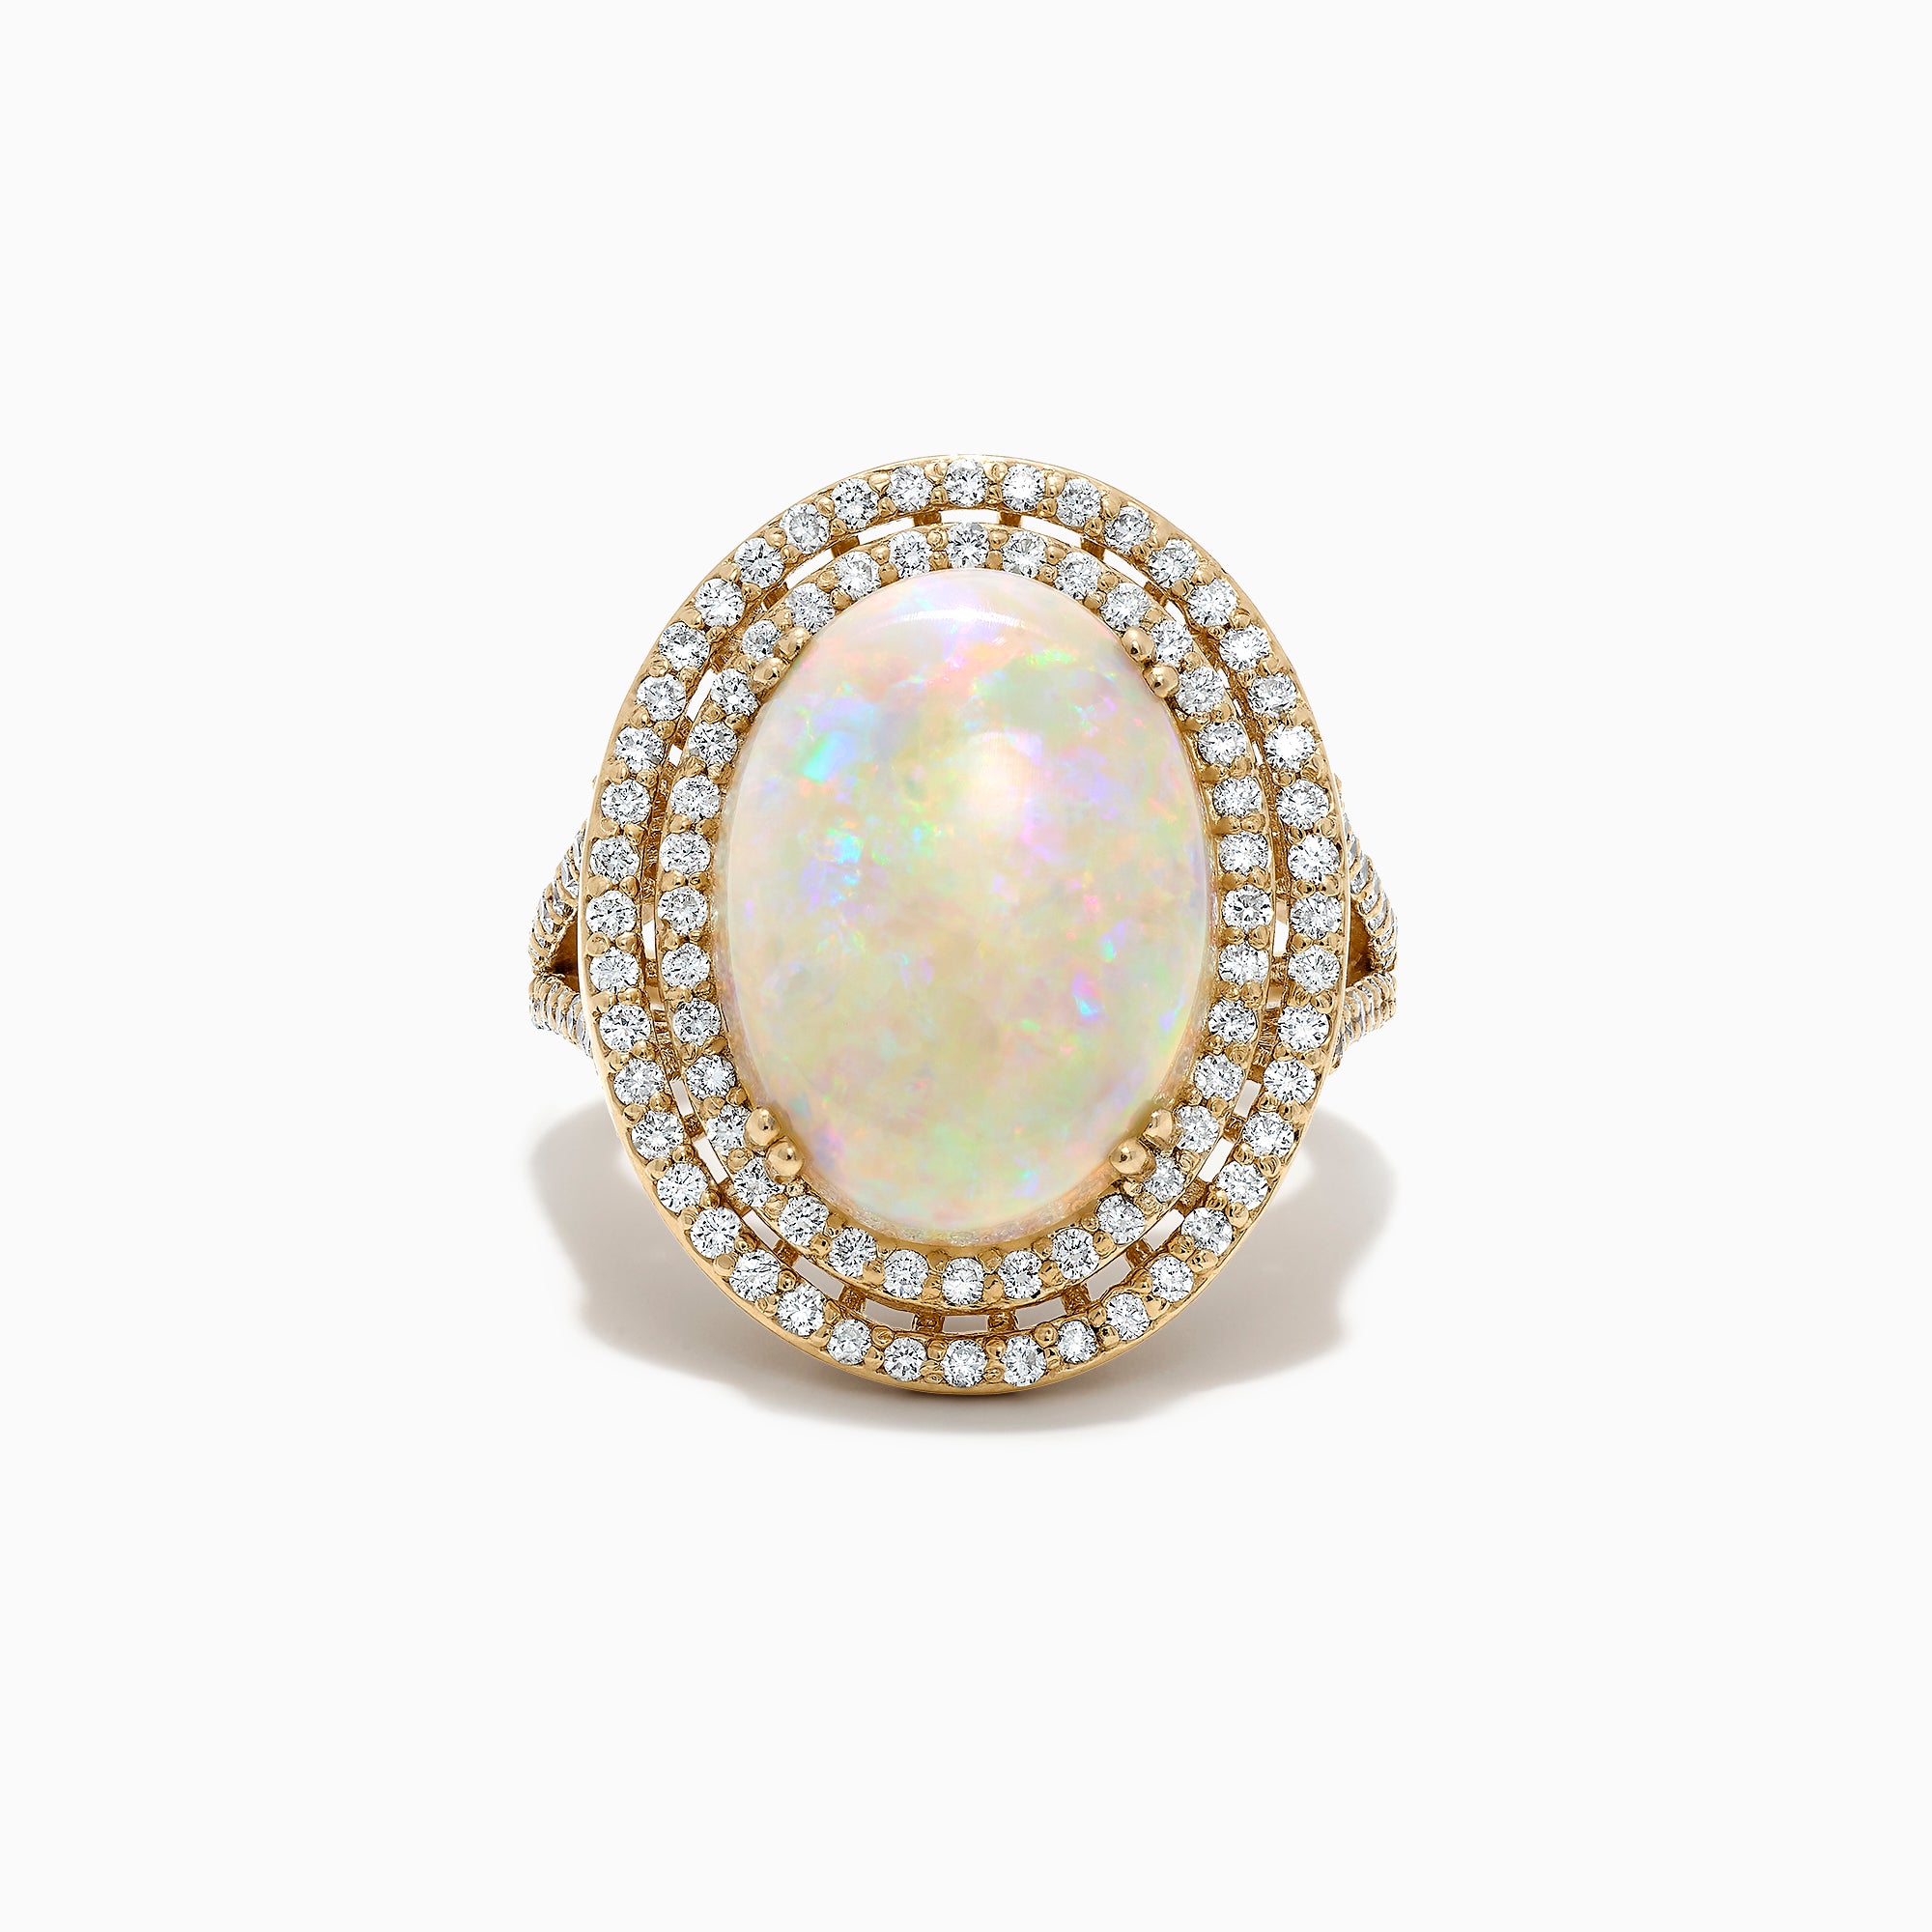 Effy Aurora 14K Yellow Gold Opal and Diamond Cocktail Ring, 5.91 TCW